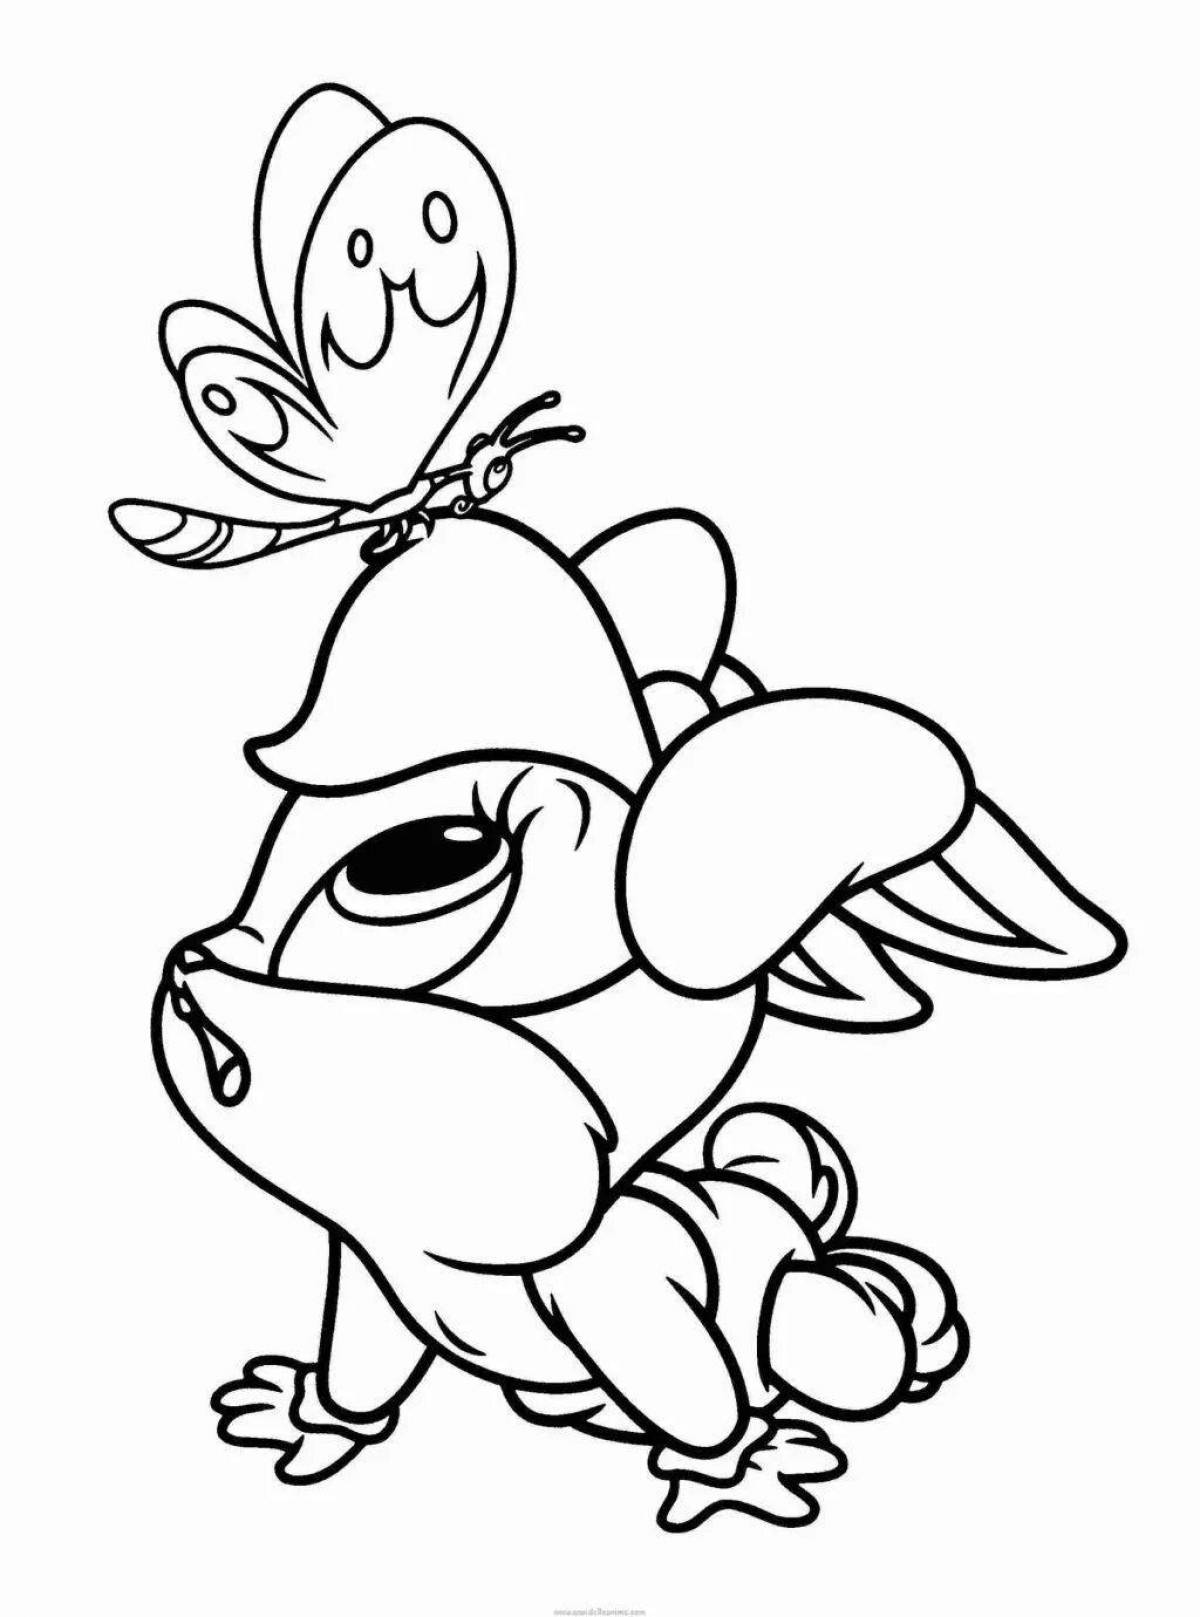 Color-frenzy cartoon character coloring page